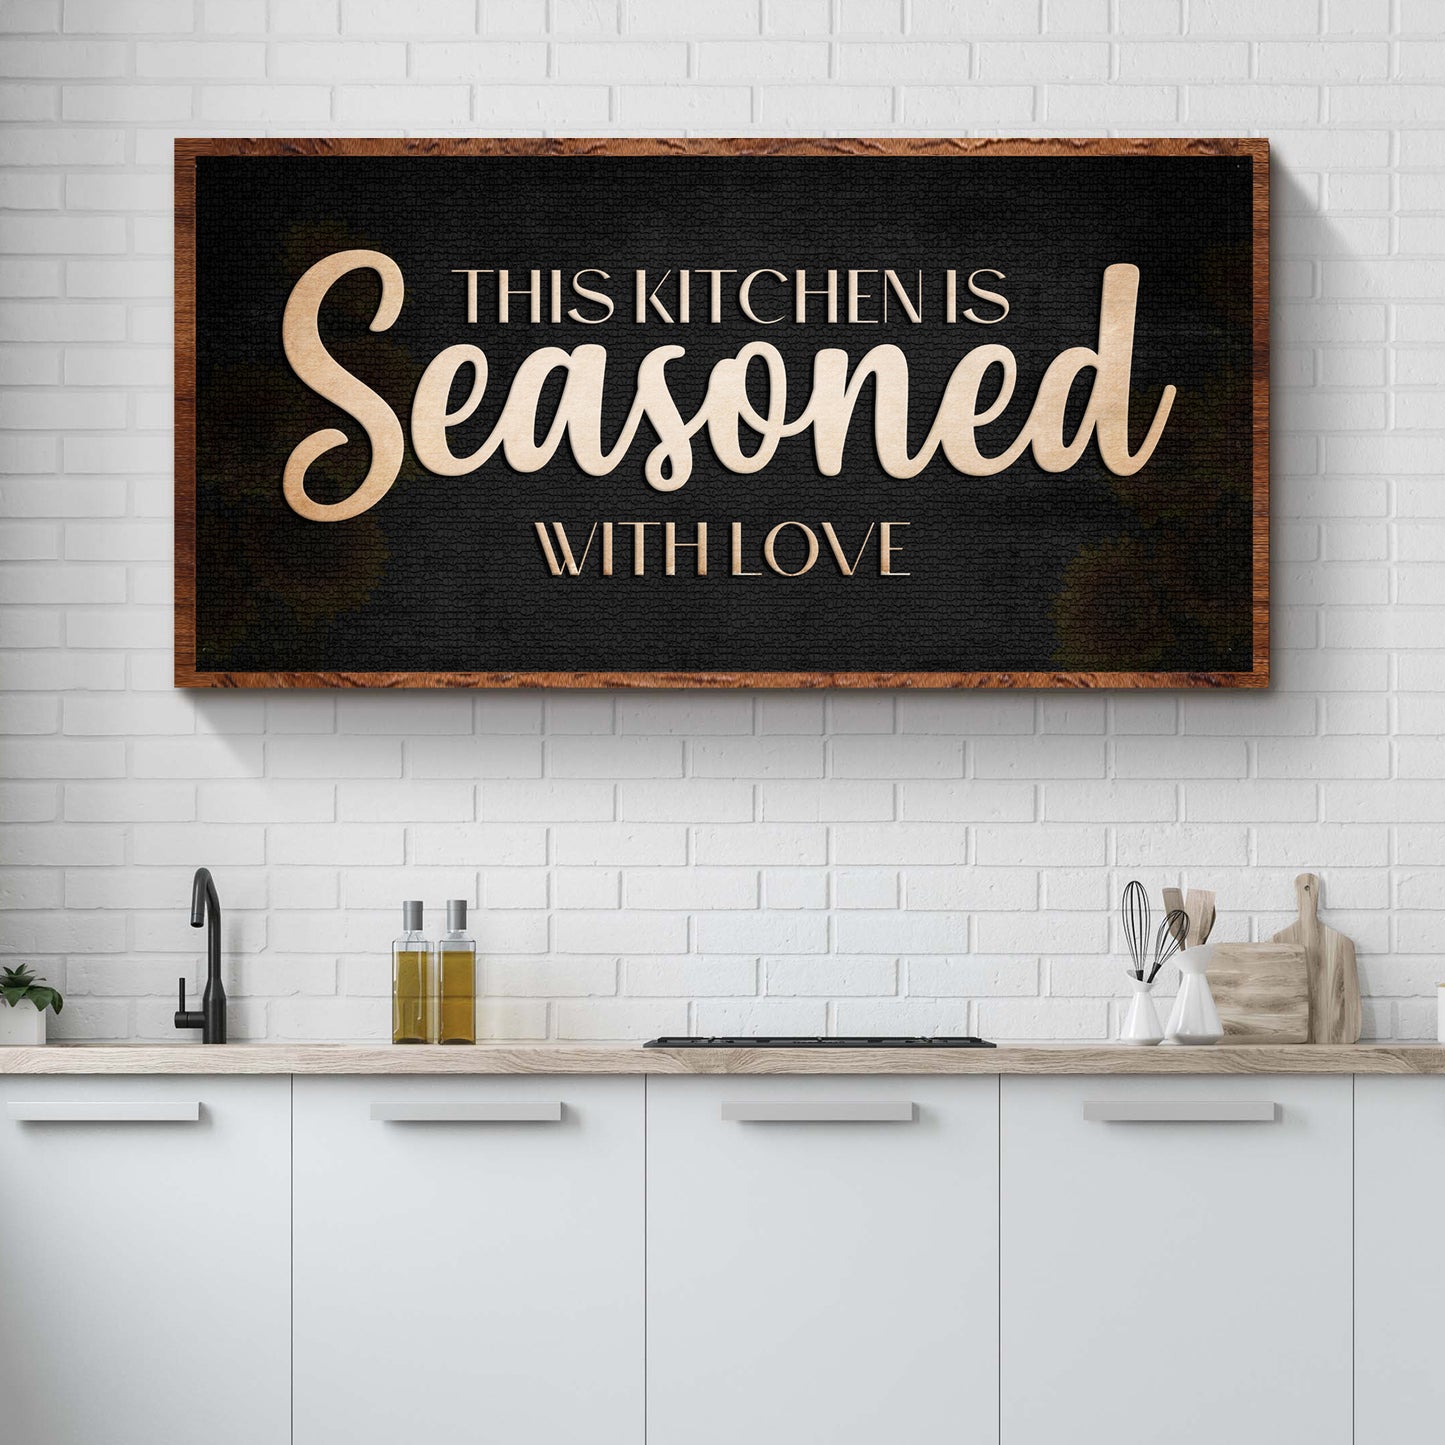 This Kitchen Is Seasoned With Love Sign - Image by Tailored Canvases